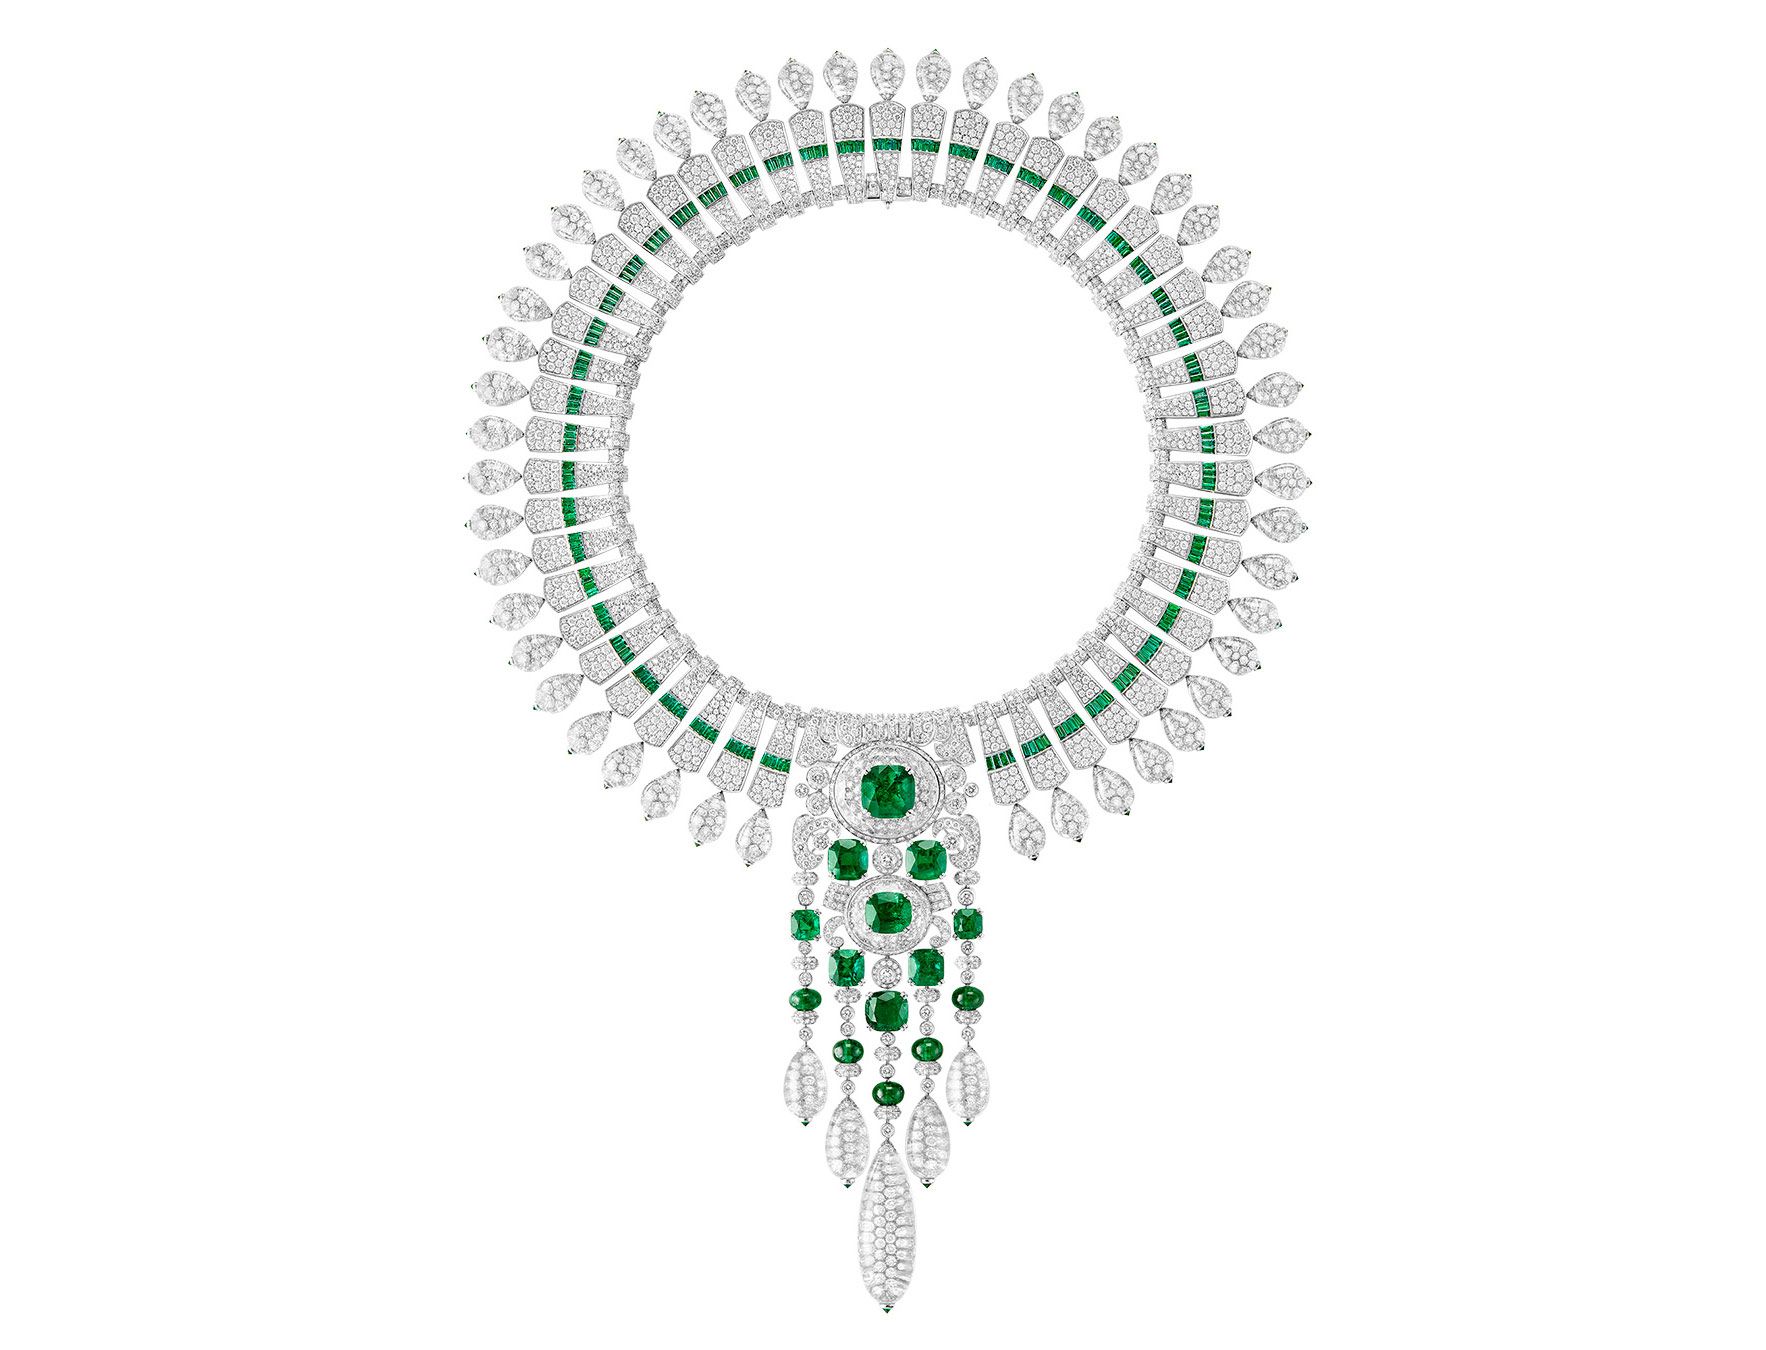 Boucheron New Maharajas necklace with a detachable front piece that converts into a brooch